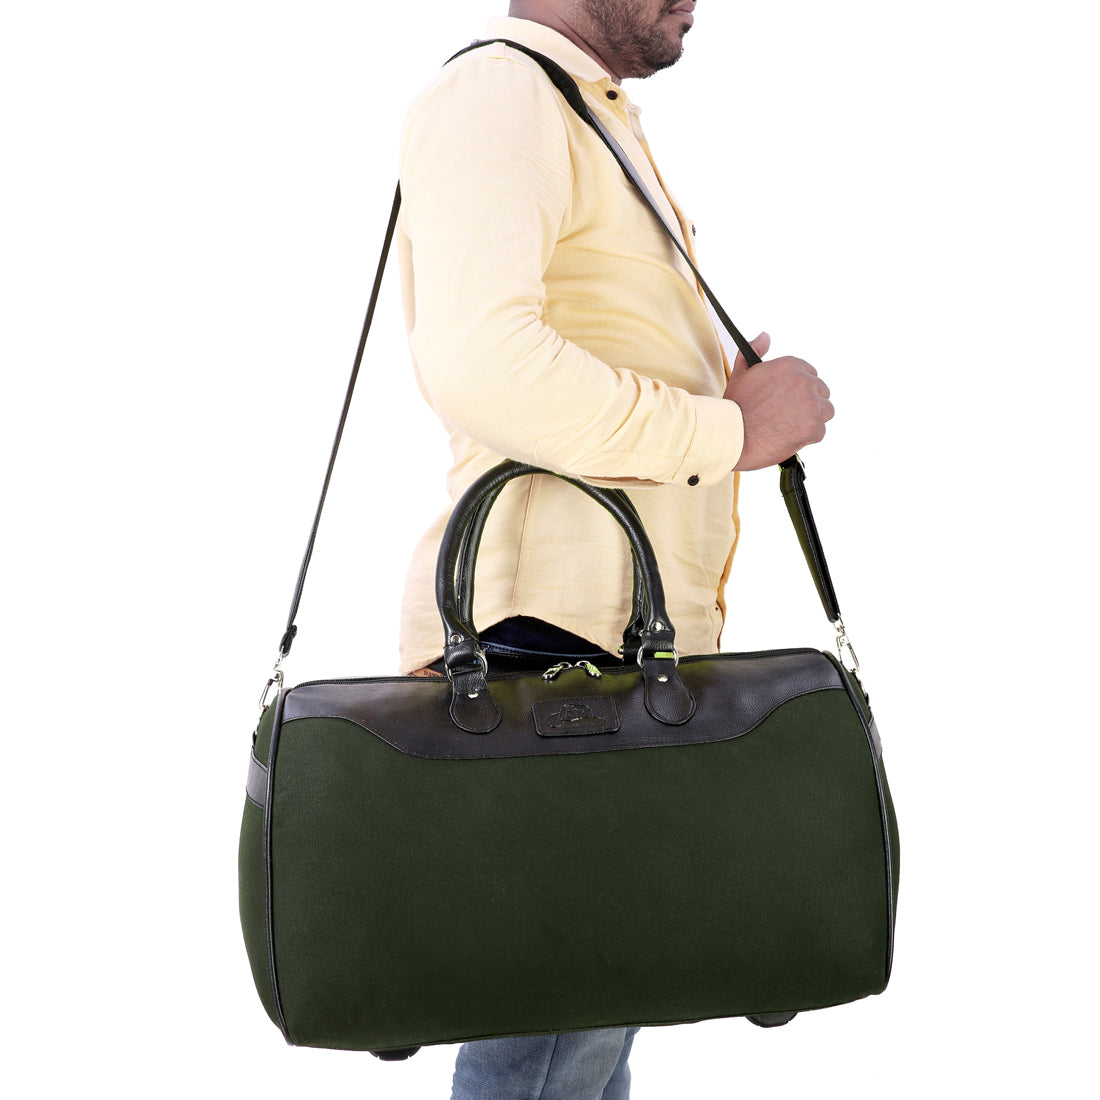 Leather World 30 Liter Canvas Duffle Bag for Travel Business Trip Overnight Luggage Bag Men and Women - Green